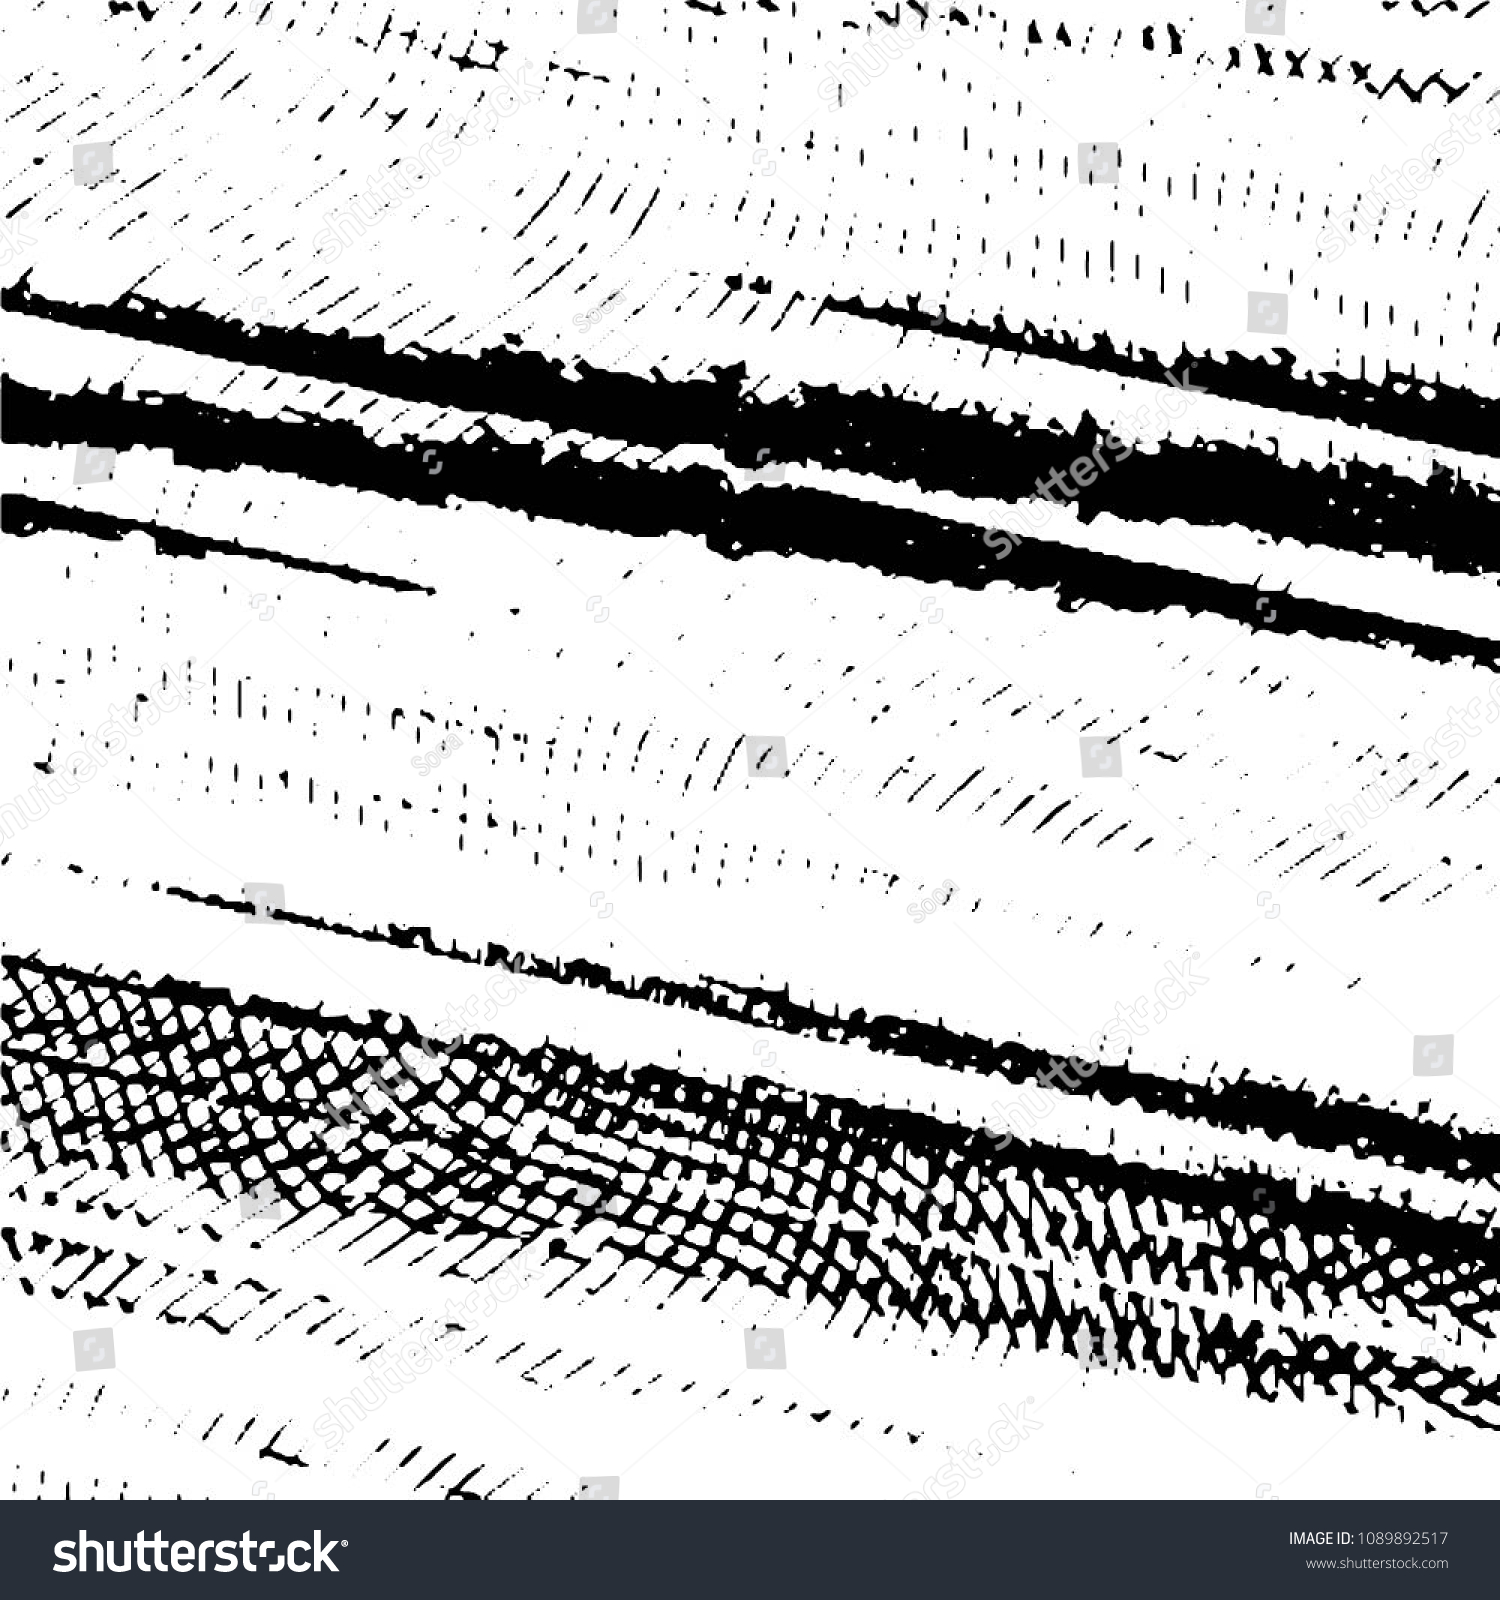 Grunge halftone black and white line texture background. Abstract stripe vector illustration Texture
 #1089892517